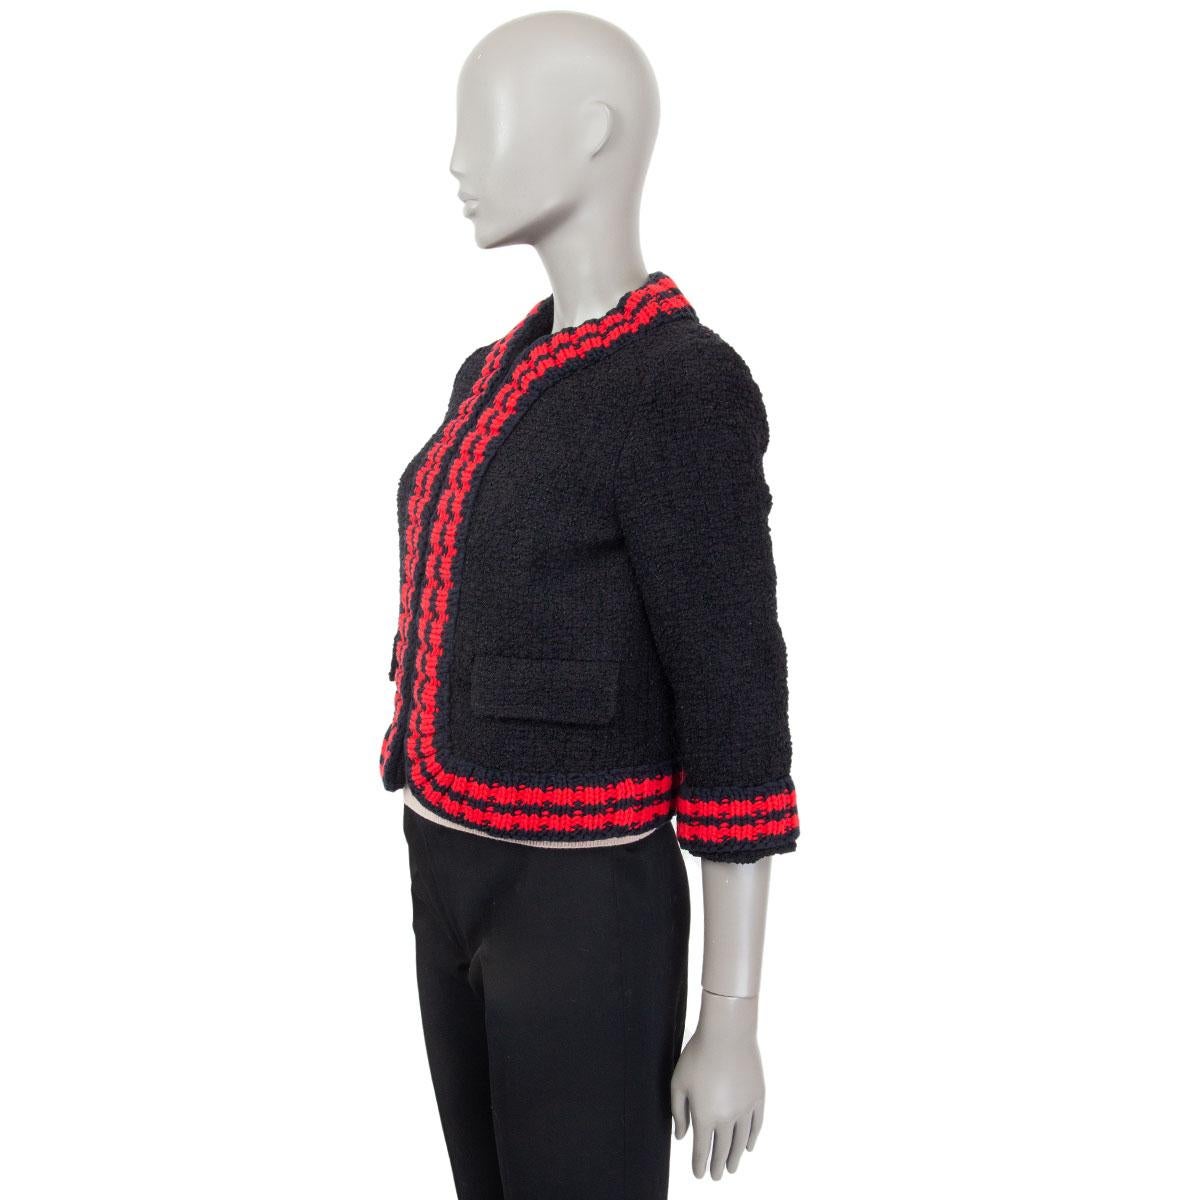 authentic Gucci bouclé-tweed cropped jacket in black polyamide (79%), cotton (11%), acrylic (10%) with contrasting red and navy ribbed wool-blend trimming in viscose (50%) and metal fibre (50%). Lined in light grey satin acetate (52%) and  viscose